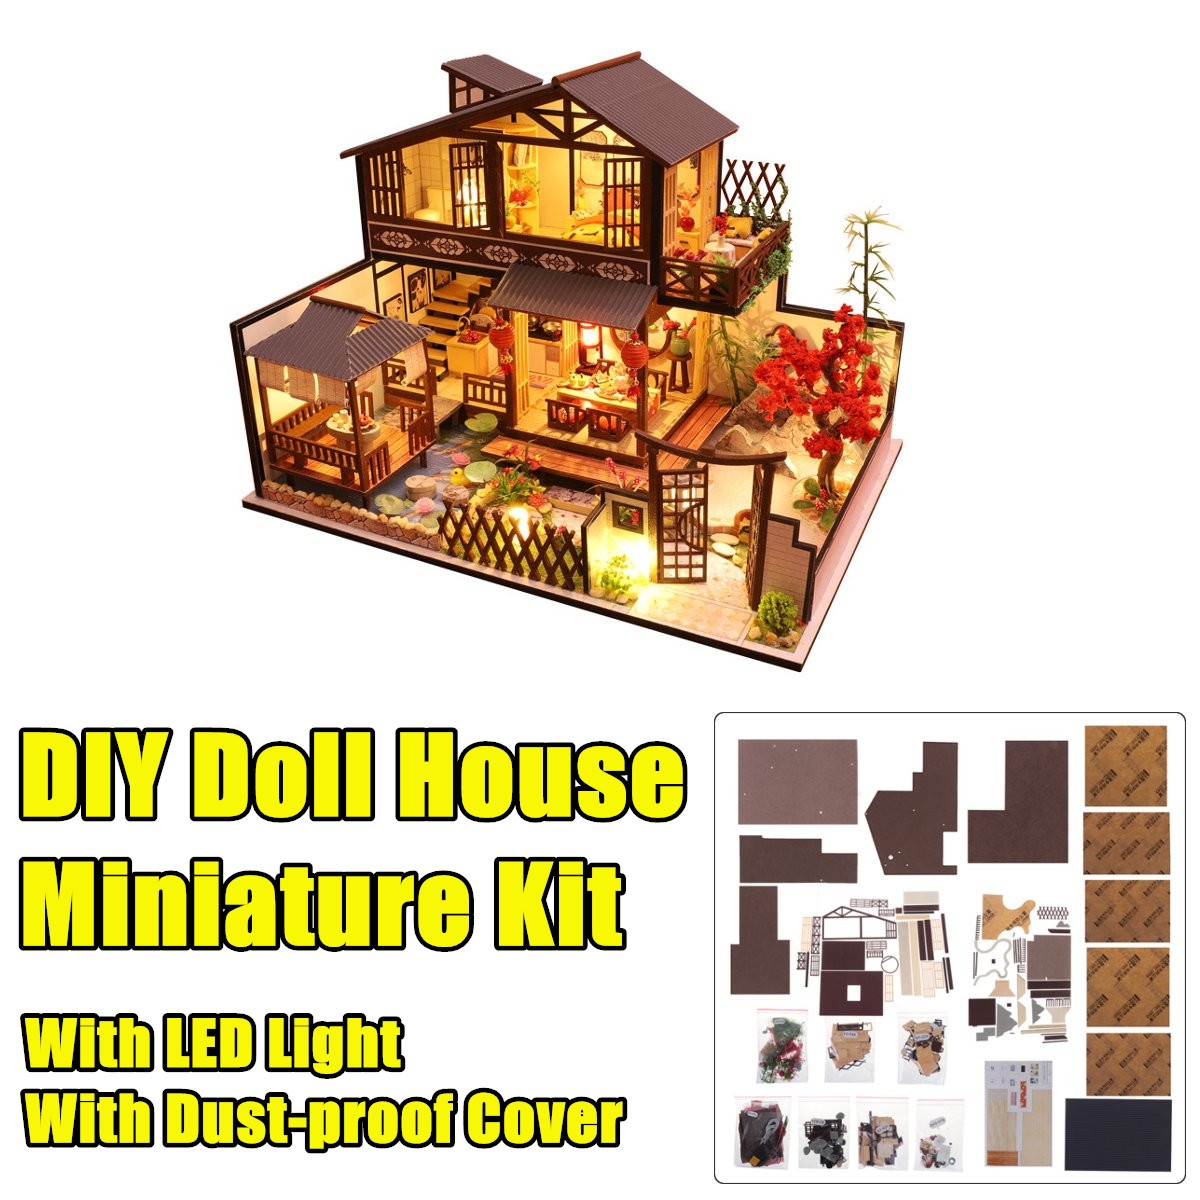 Wooden DIY Courtyard Doll House Miniature Kit Handmade Assemble Toy with LED Light Dust-proof Cover for Gift Collection